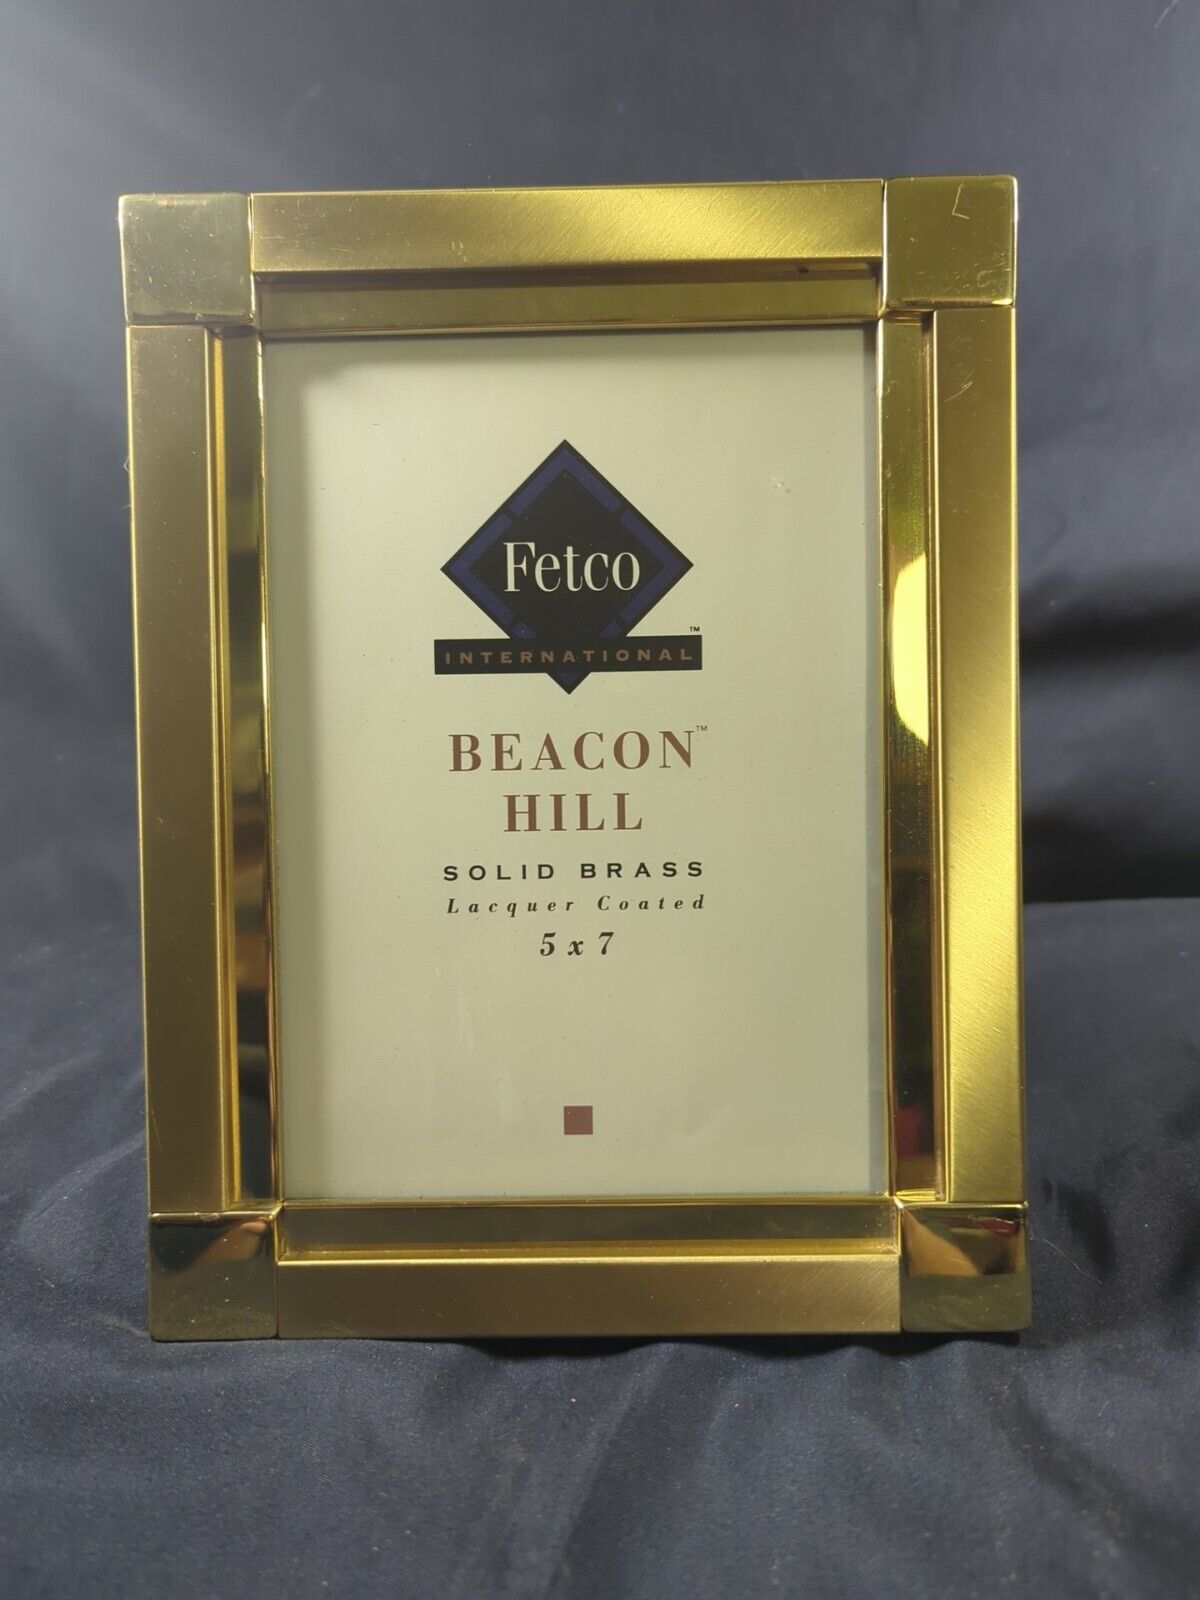 Vintage FETCO Beacon Hill Solid Brass Gold Lacquer Coated Picture Frame 5x7 